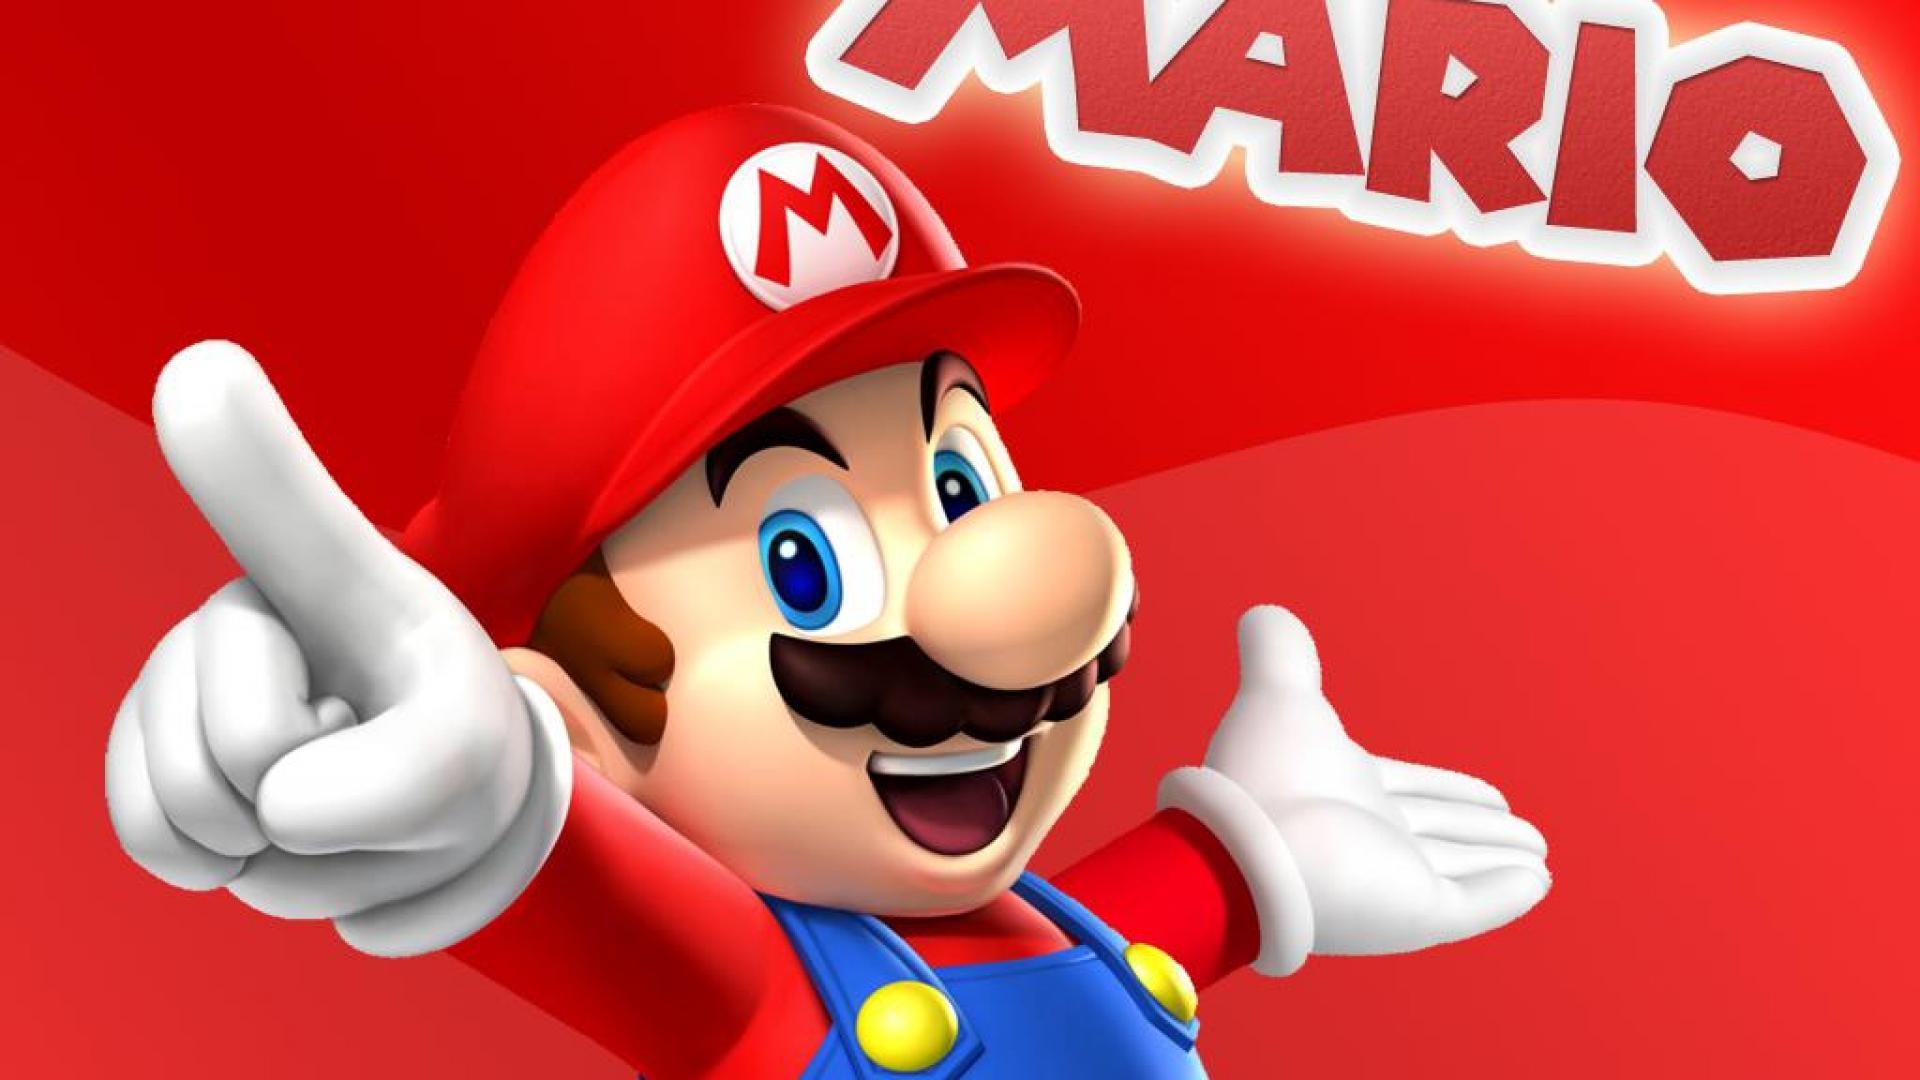 1920x1080 Wallpaper Live Android Super Mario - YouTube | Download Wallpaper |  Pinterest | Android video, Live wallpapers and Wallpaper